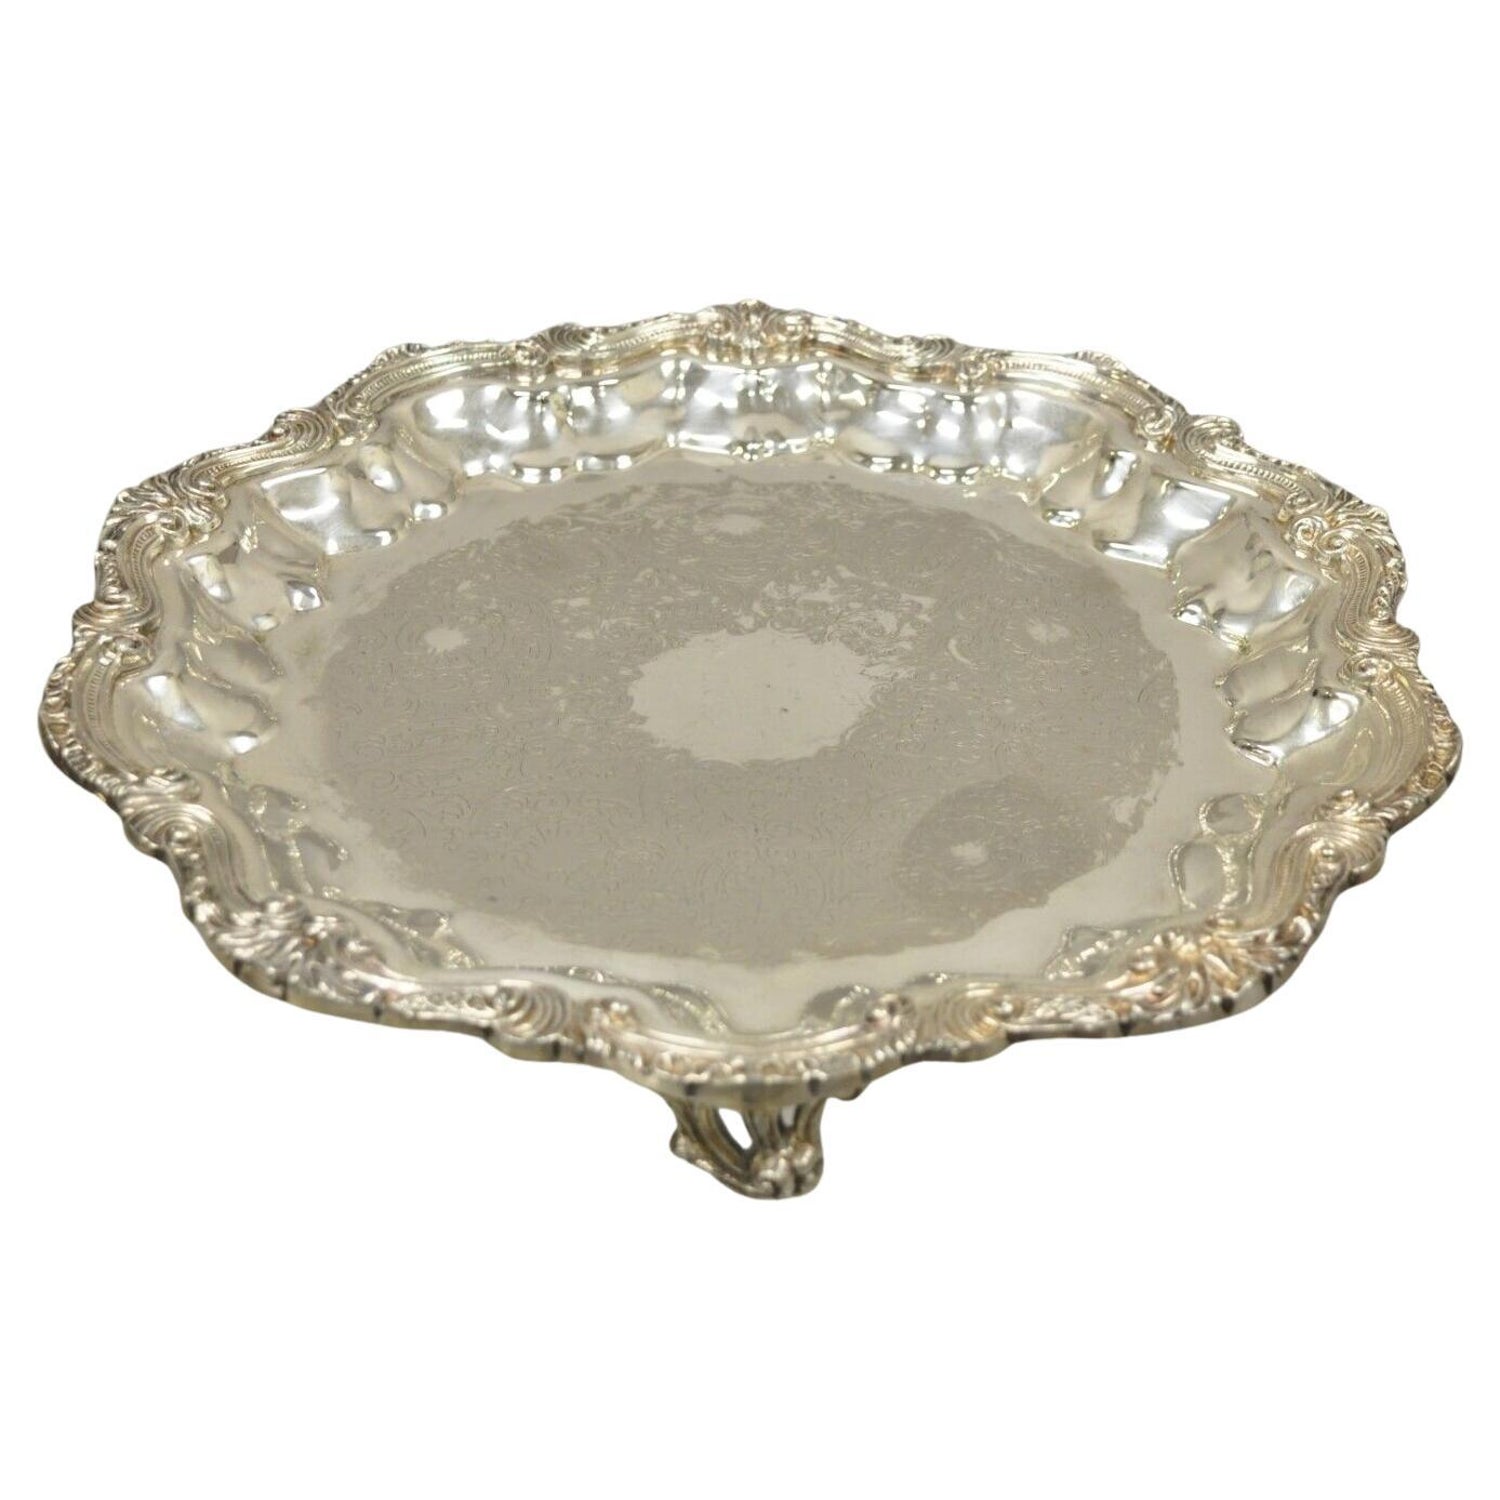 https://a.1stdibscdn.com/english-silver-mfg-corp-silver-plated-12-regency-style-scalloped-platter-tray-for-sale/f_9341/f_306877321664810955270/f_30687732_1664810955618_bg_processed.jpg?width=1500